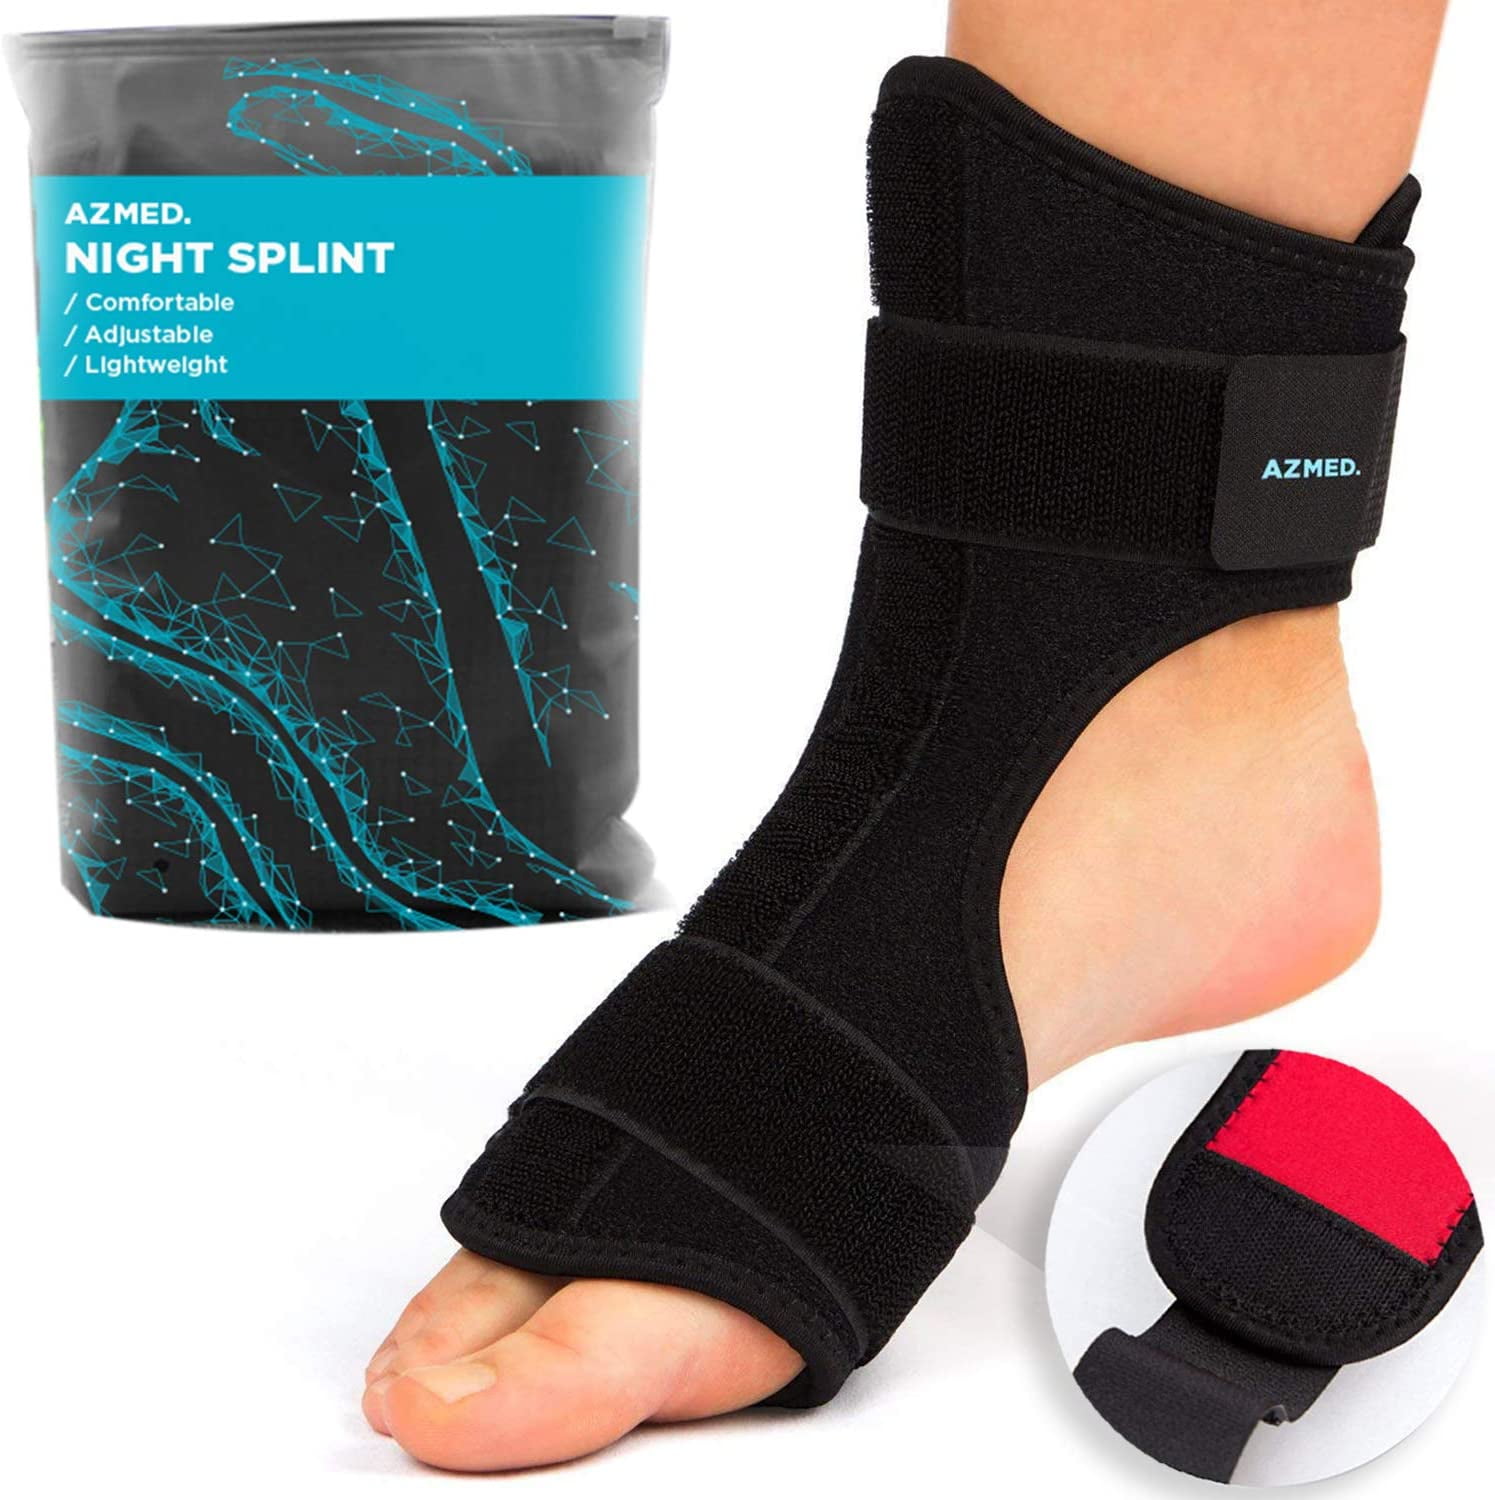 AZMED 2020 Plantar Fasciitis Night Splint [Lightweight & Breathable],  Adjustable Foot Drop Brace, Heel, Ankle & Achilles Tendonitis Relief, Arch  Pain Support, Easy to Wear, Fits Most Feet Types, Black 